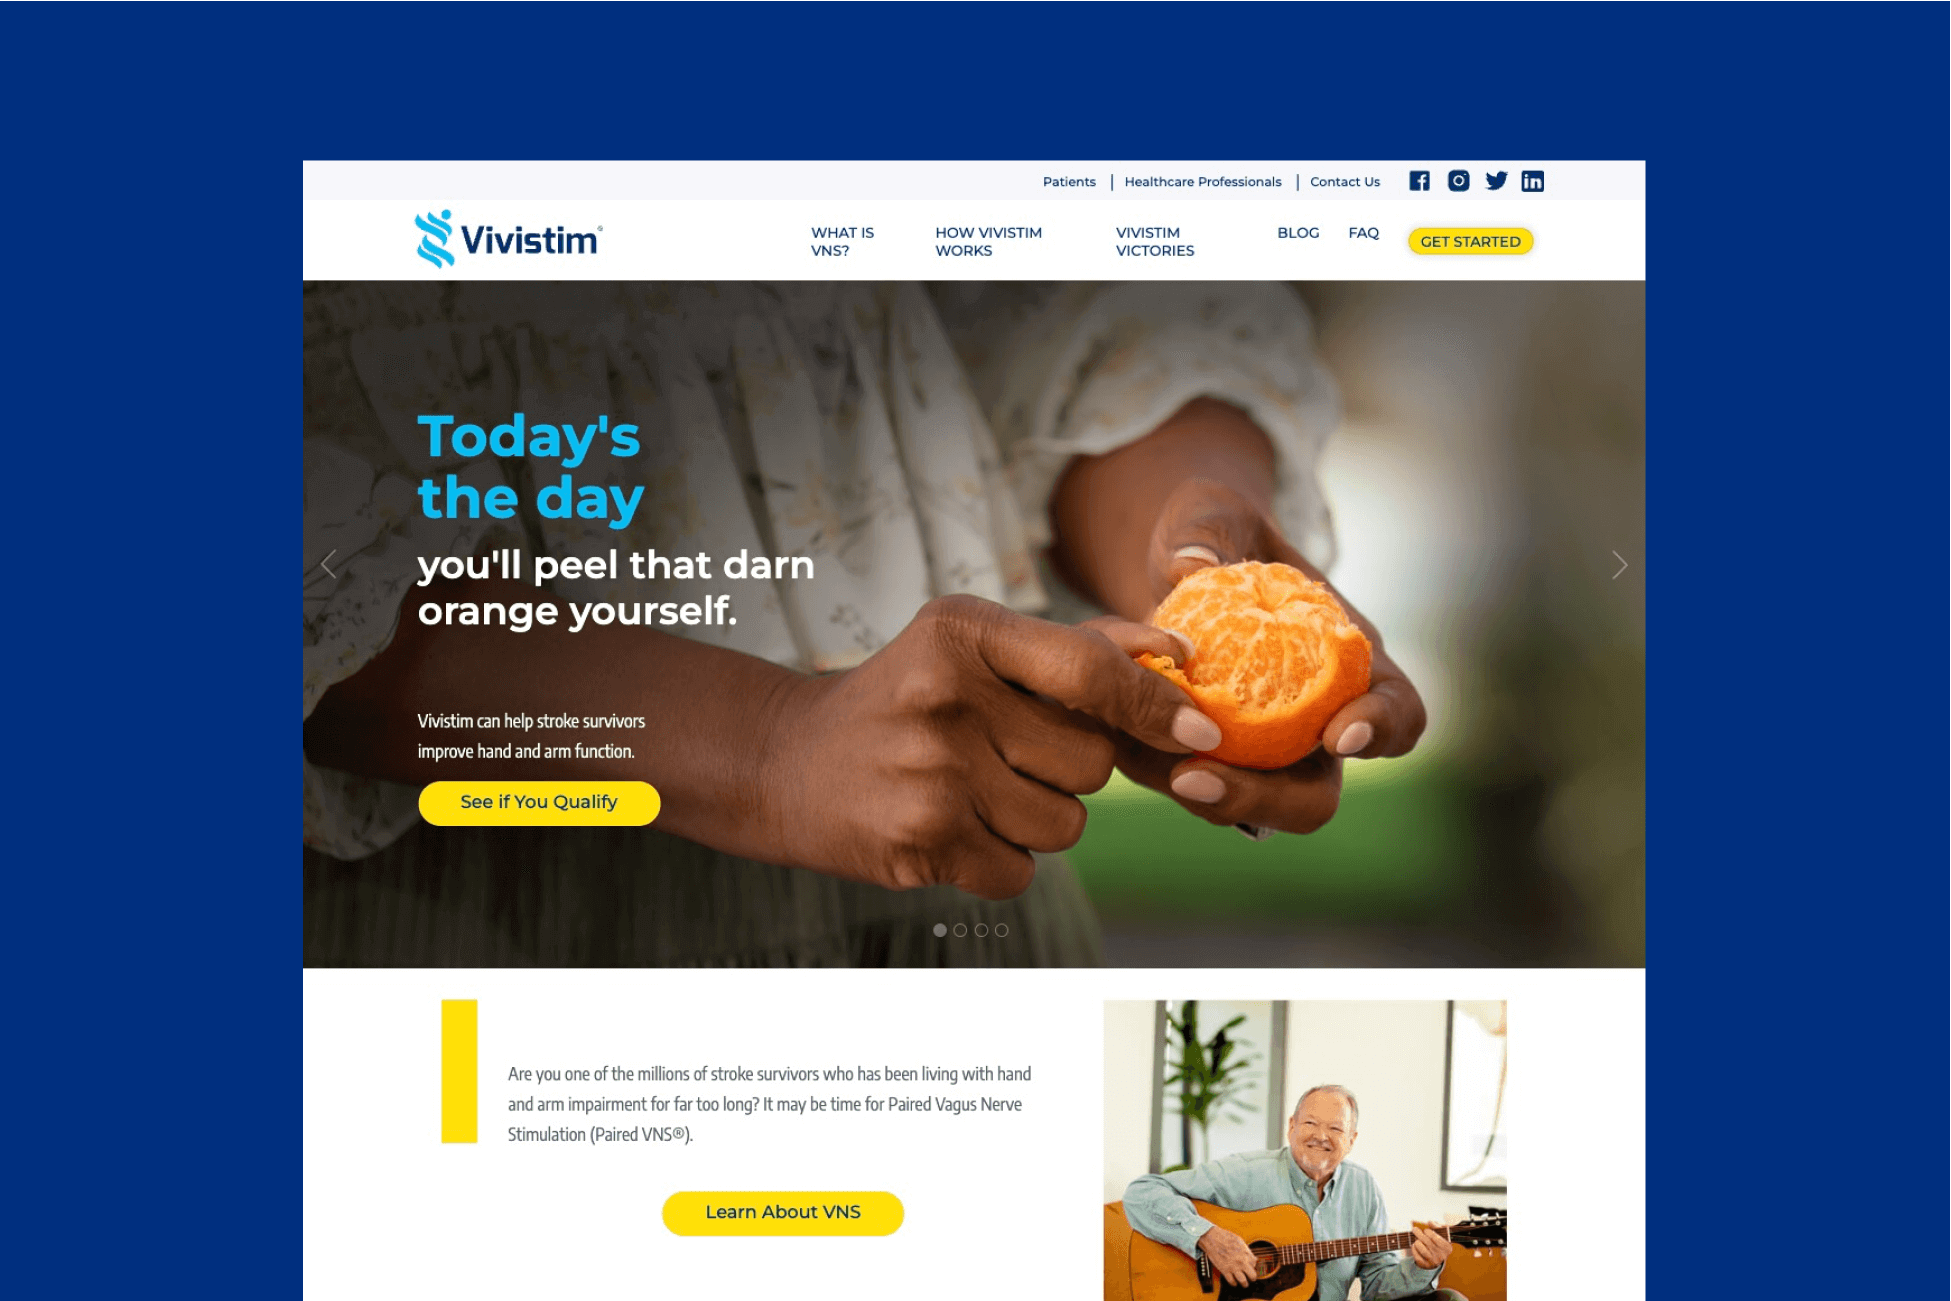 Vivistim's homepage featuring a hero image of someone peeling an orange with the caption 